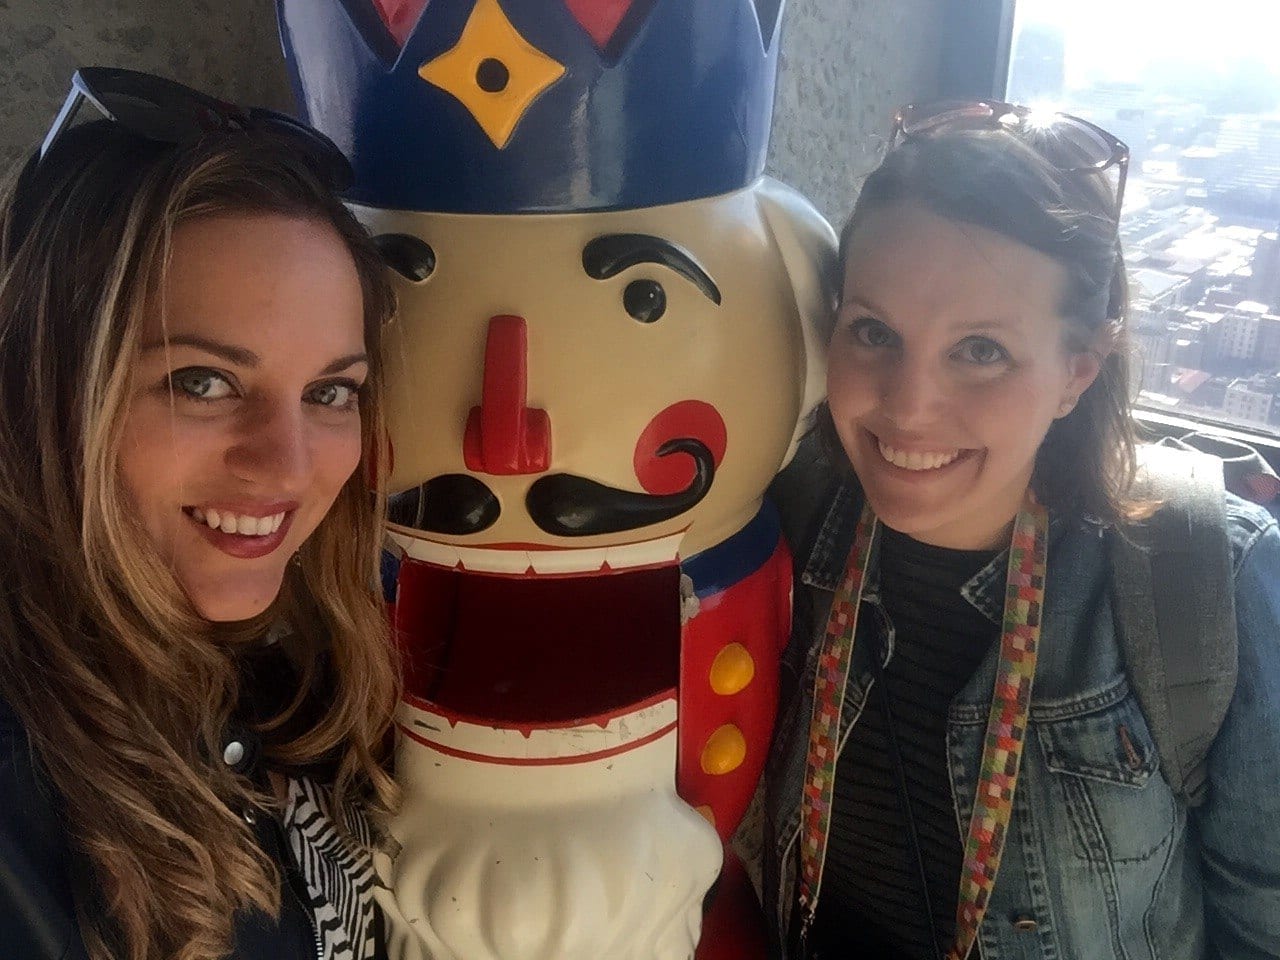 Kate and Beth with the Nutcracker in Johannesburg